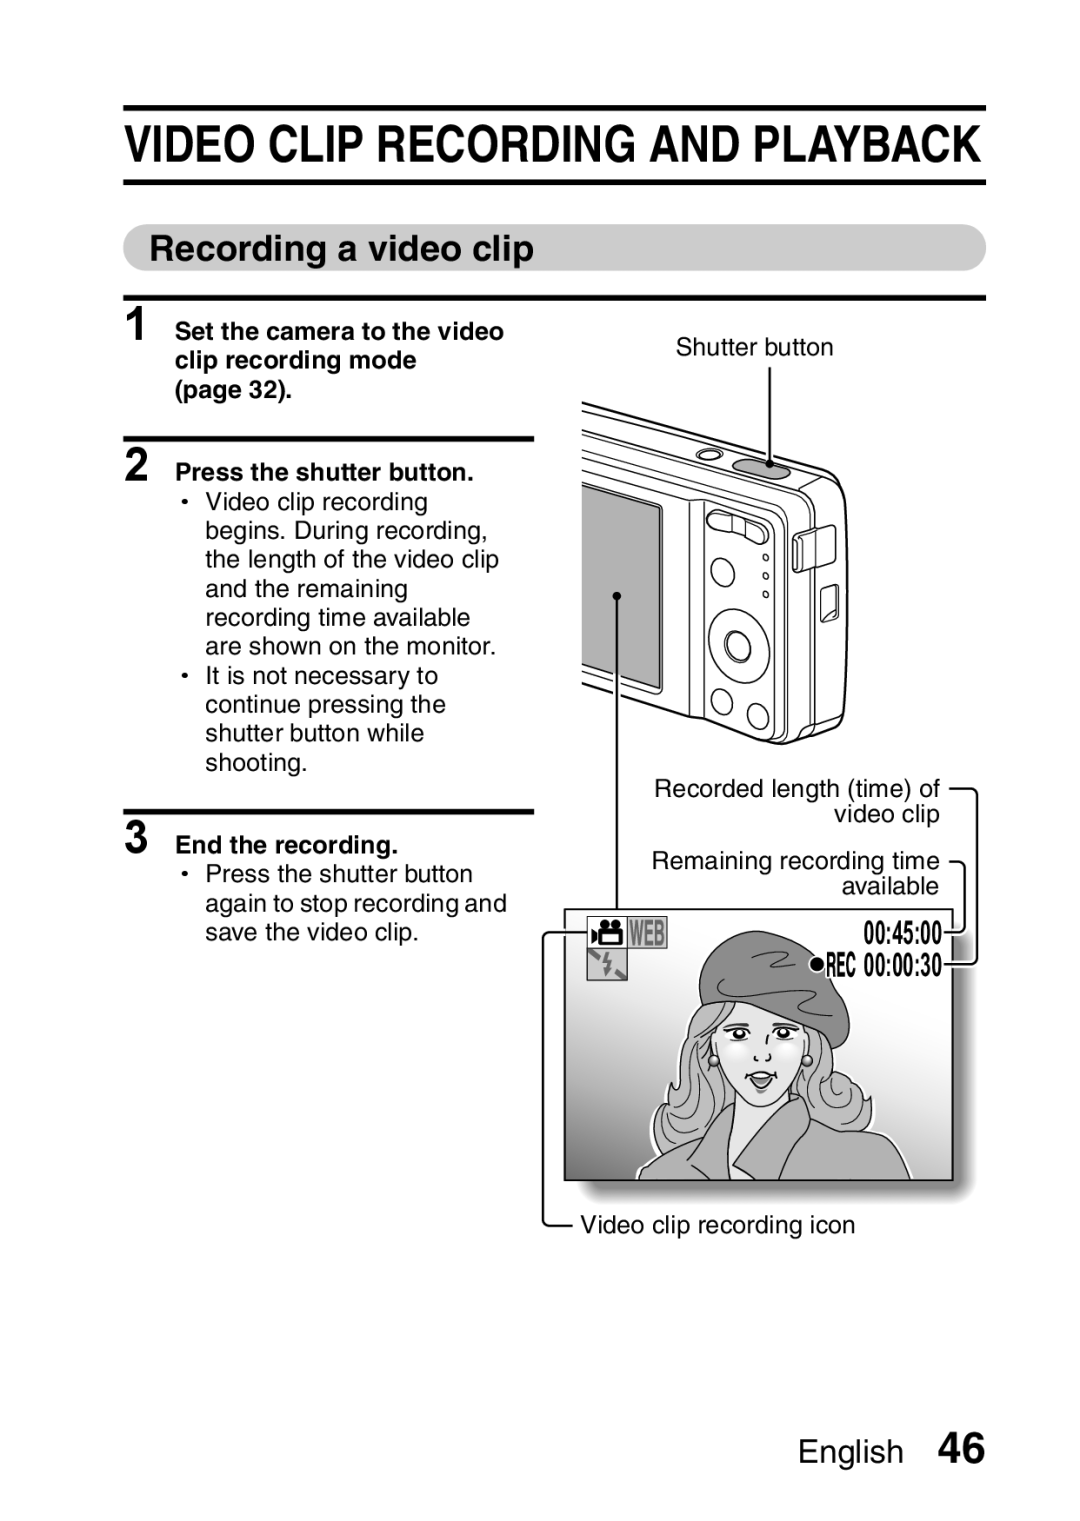 Samsung R50 Video Clip Recording And Playback, Recording a video clip, English, Set the camera to the video 